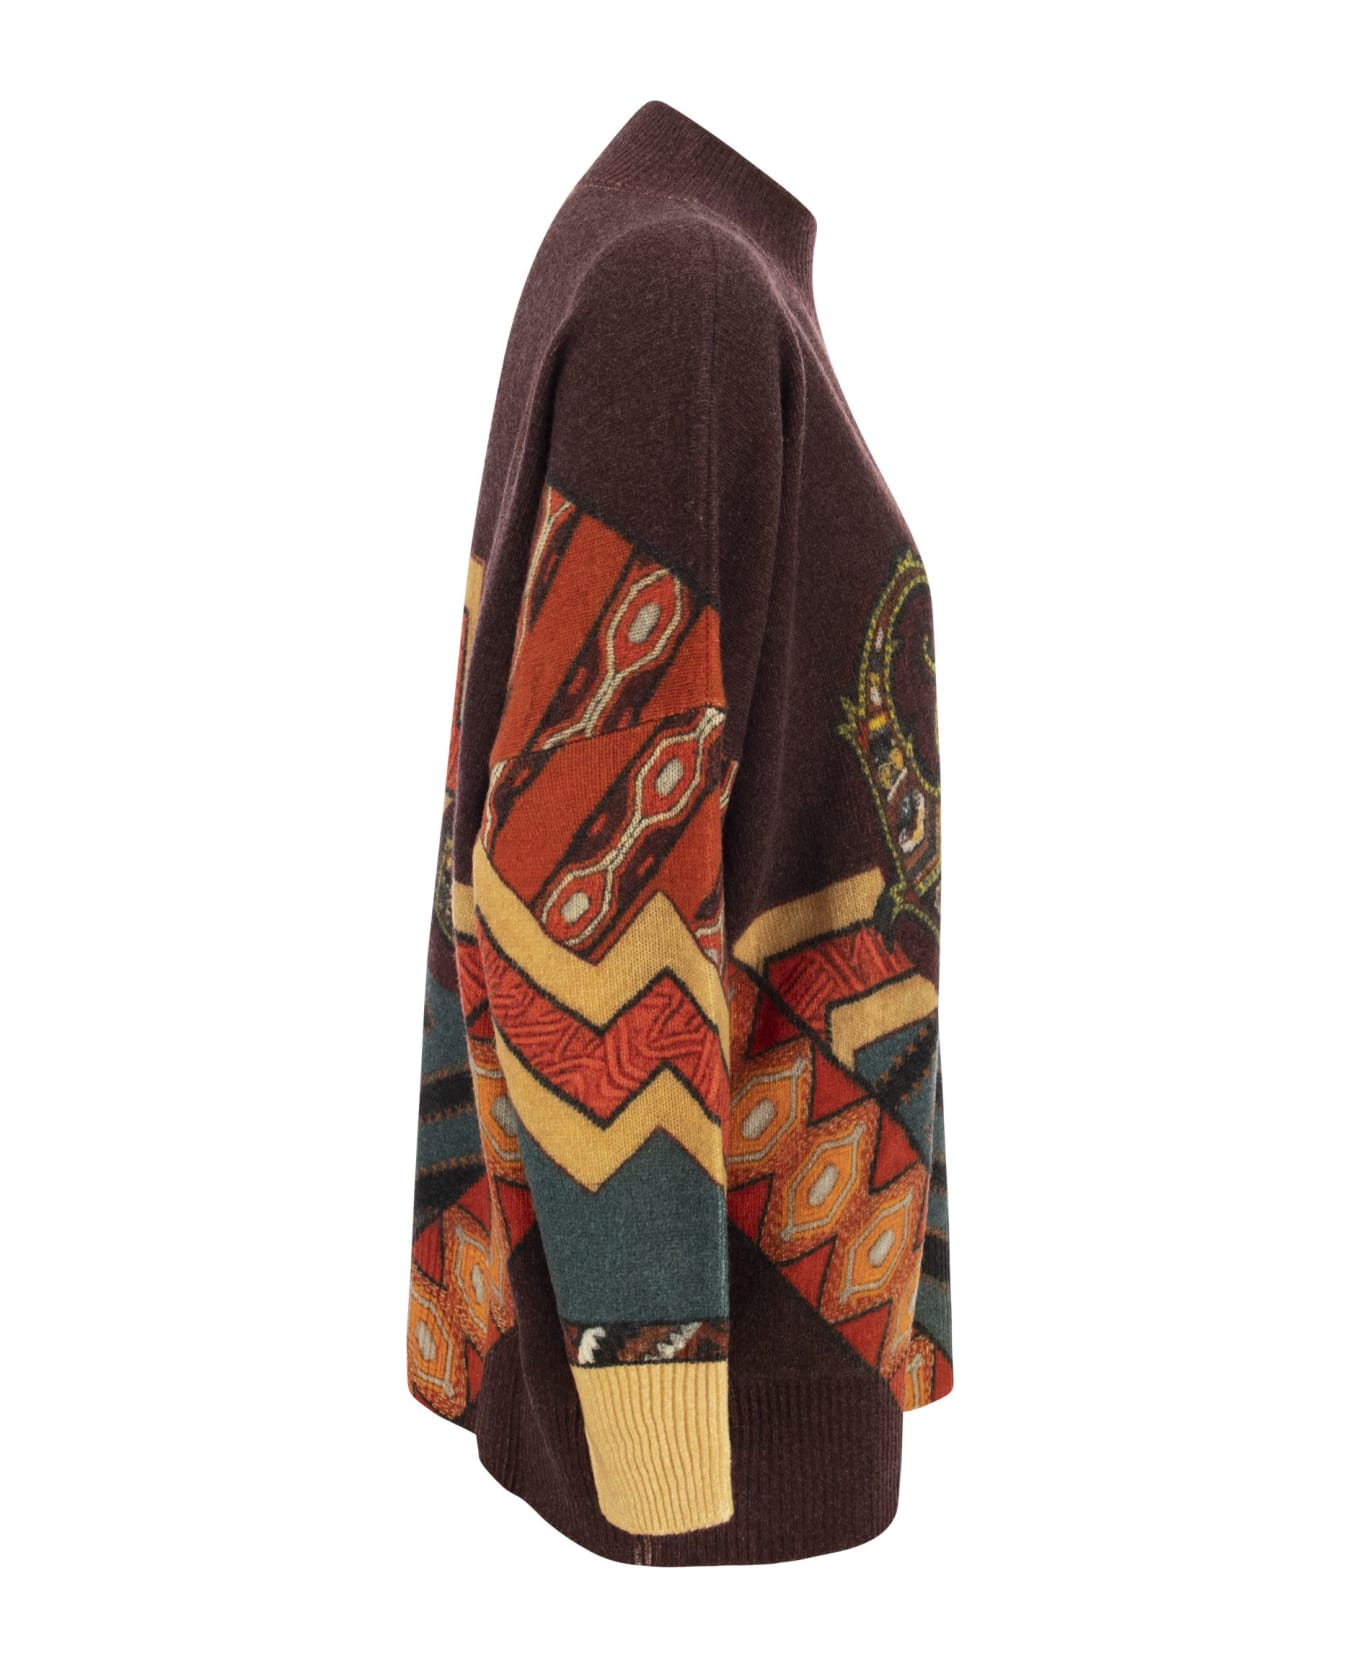 Etro Wool Sweater With Patchwork Print - Bordeaux ニットウェア